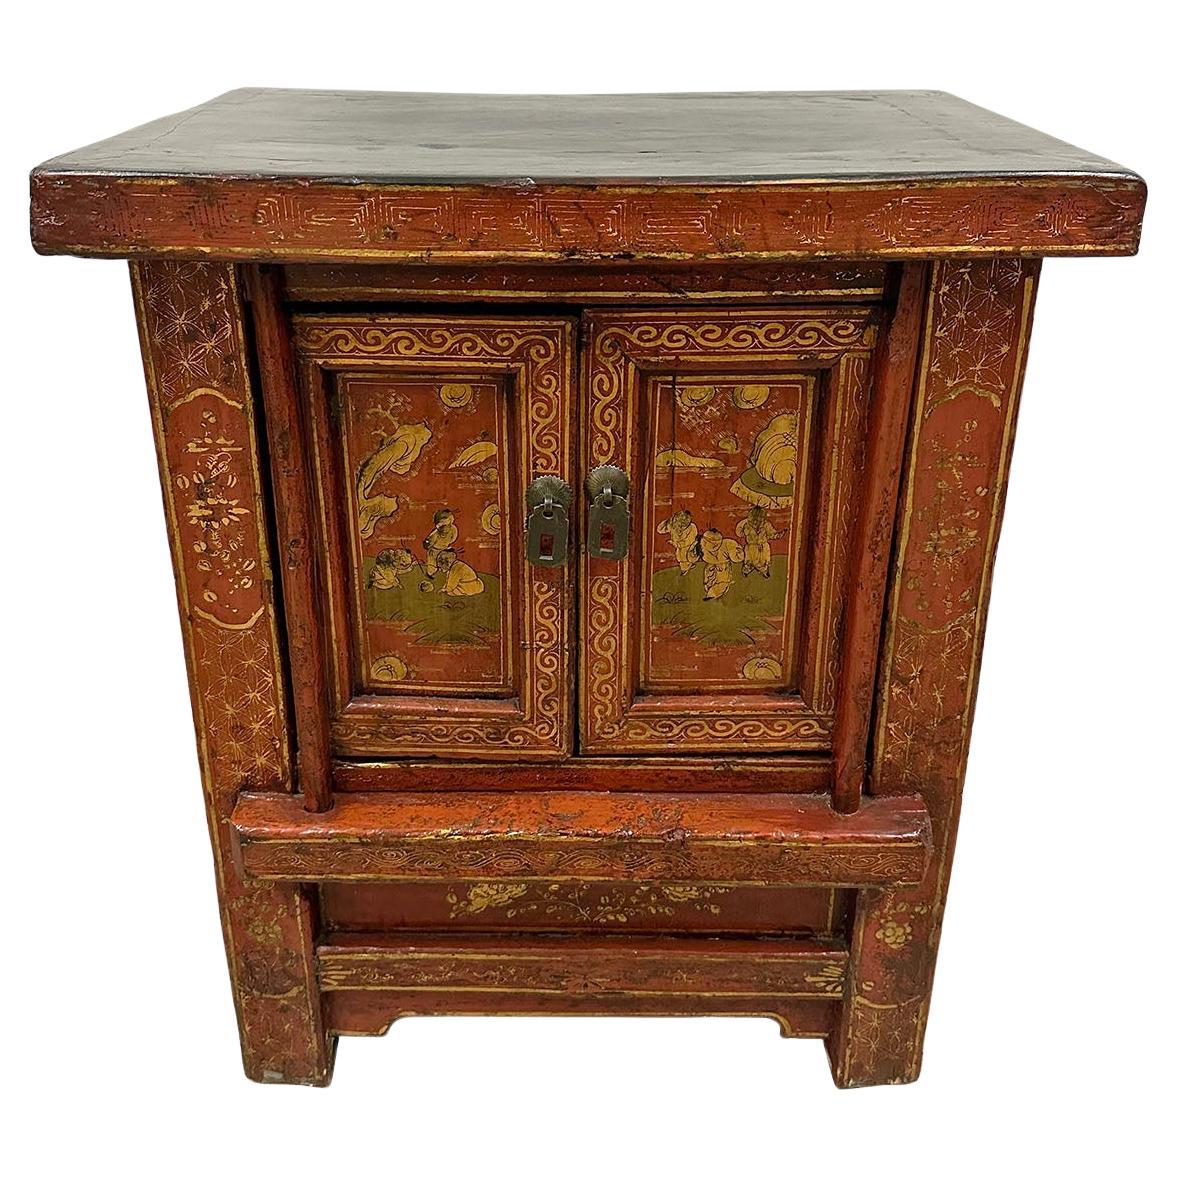 Chinese Late Qing Dynasty Bedside Wooden Cabinet with Period Painting Art Works For Sale